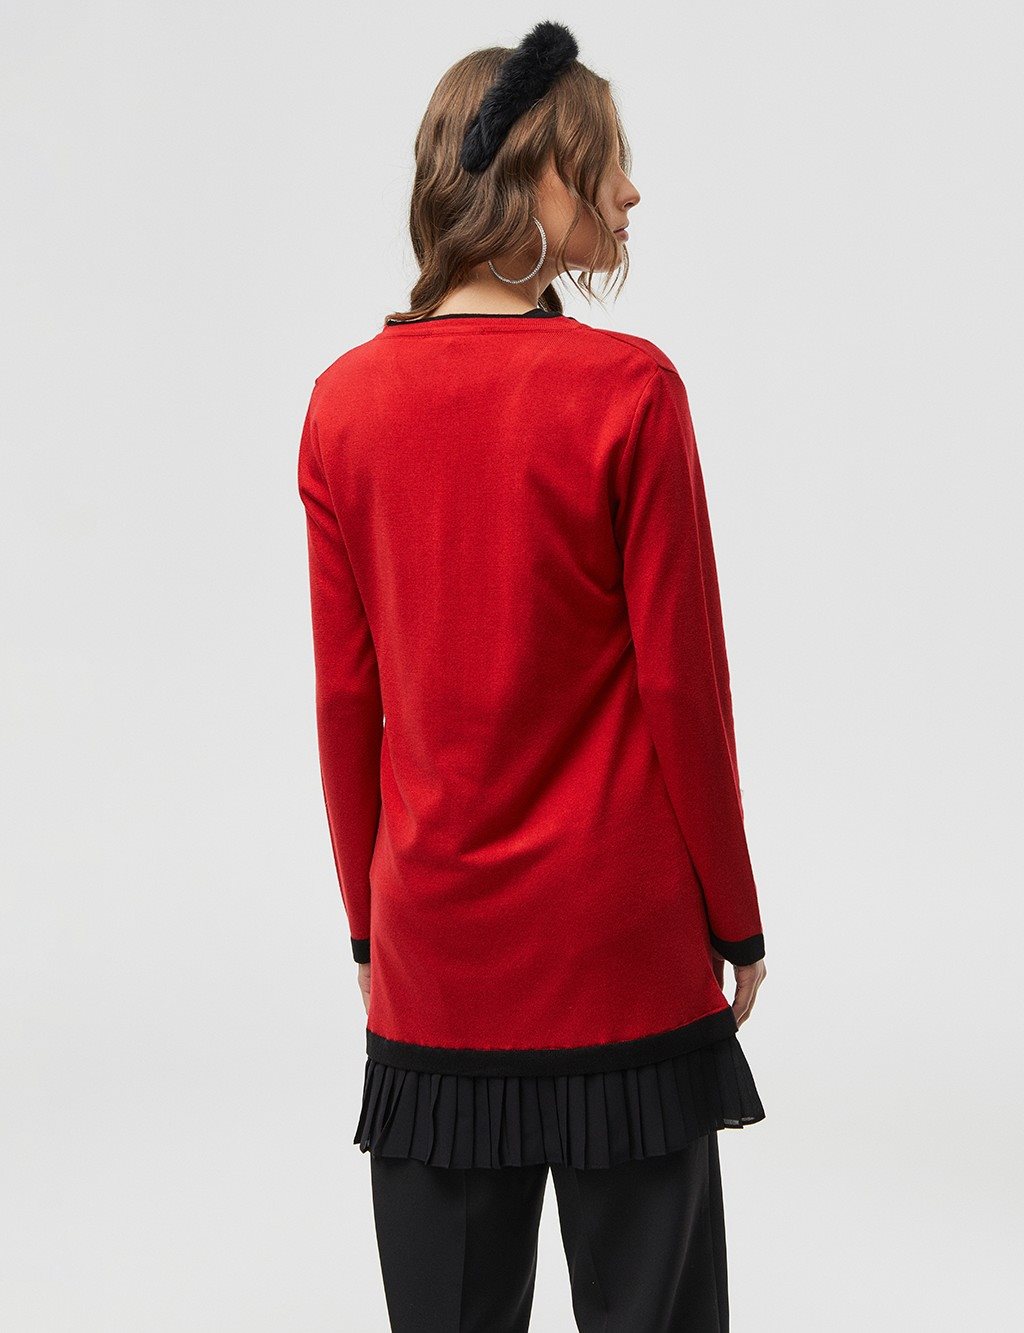 Skirt Pleated Knitwear Cardigan Red